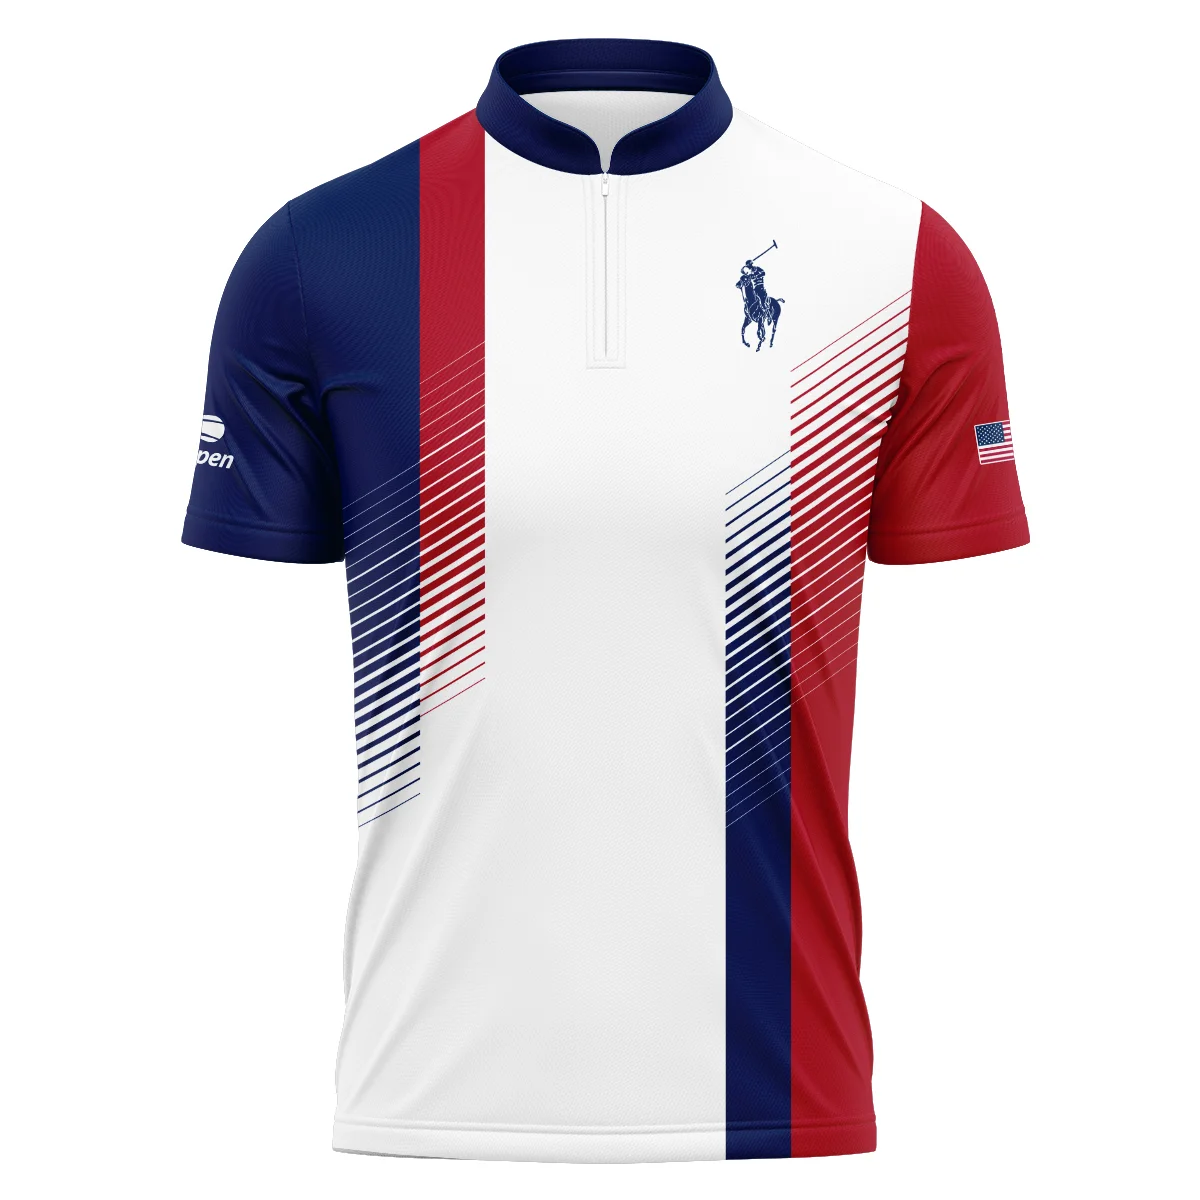 Ralph Lauren Blue Red Straight Line White US Open Tennis Champions Polo Shirt Style Classic Polo Shirt For Men